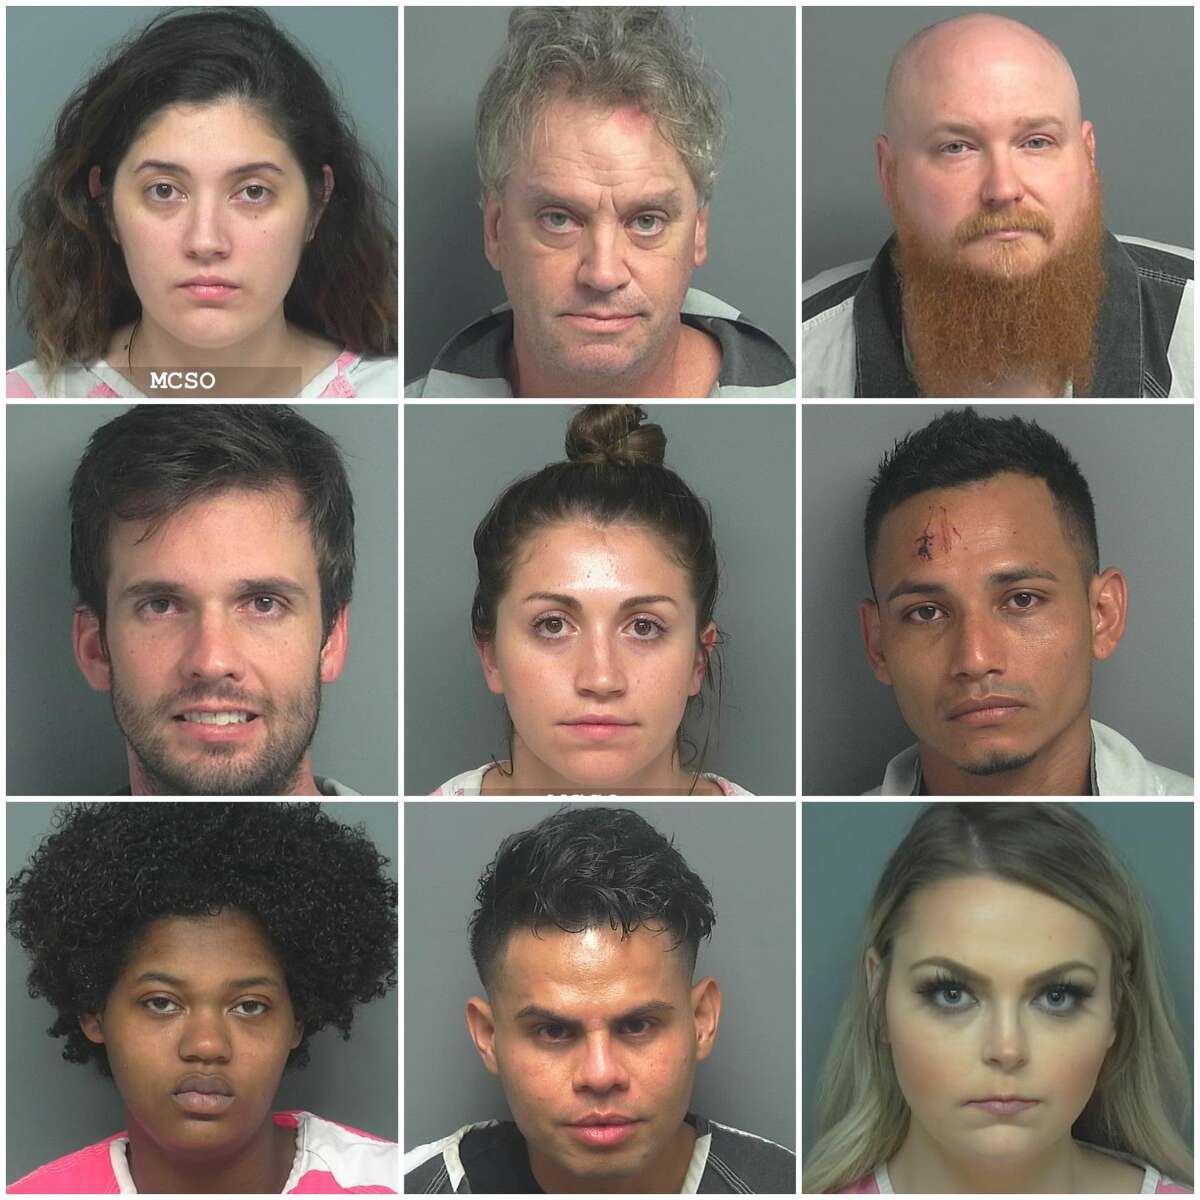 PHOTOS: Labor Day DWI arrestsMore than 750 drivers were arrested on various charges related to driving while intoxicated (DWI) in Montgomery County from Memorial Day weekend through Labor Day weekend. Over Labor Day weekend, 61 people were arrested on DWI charges.>>>See mugshots and charges from Labor Day weekend in Montgomery County...